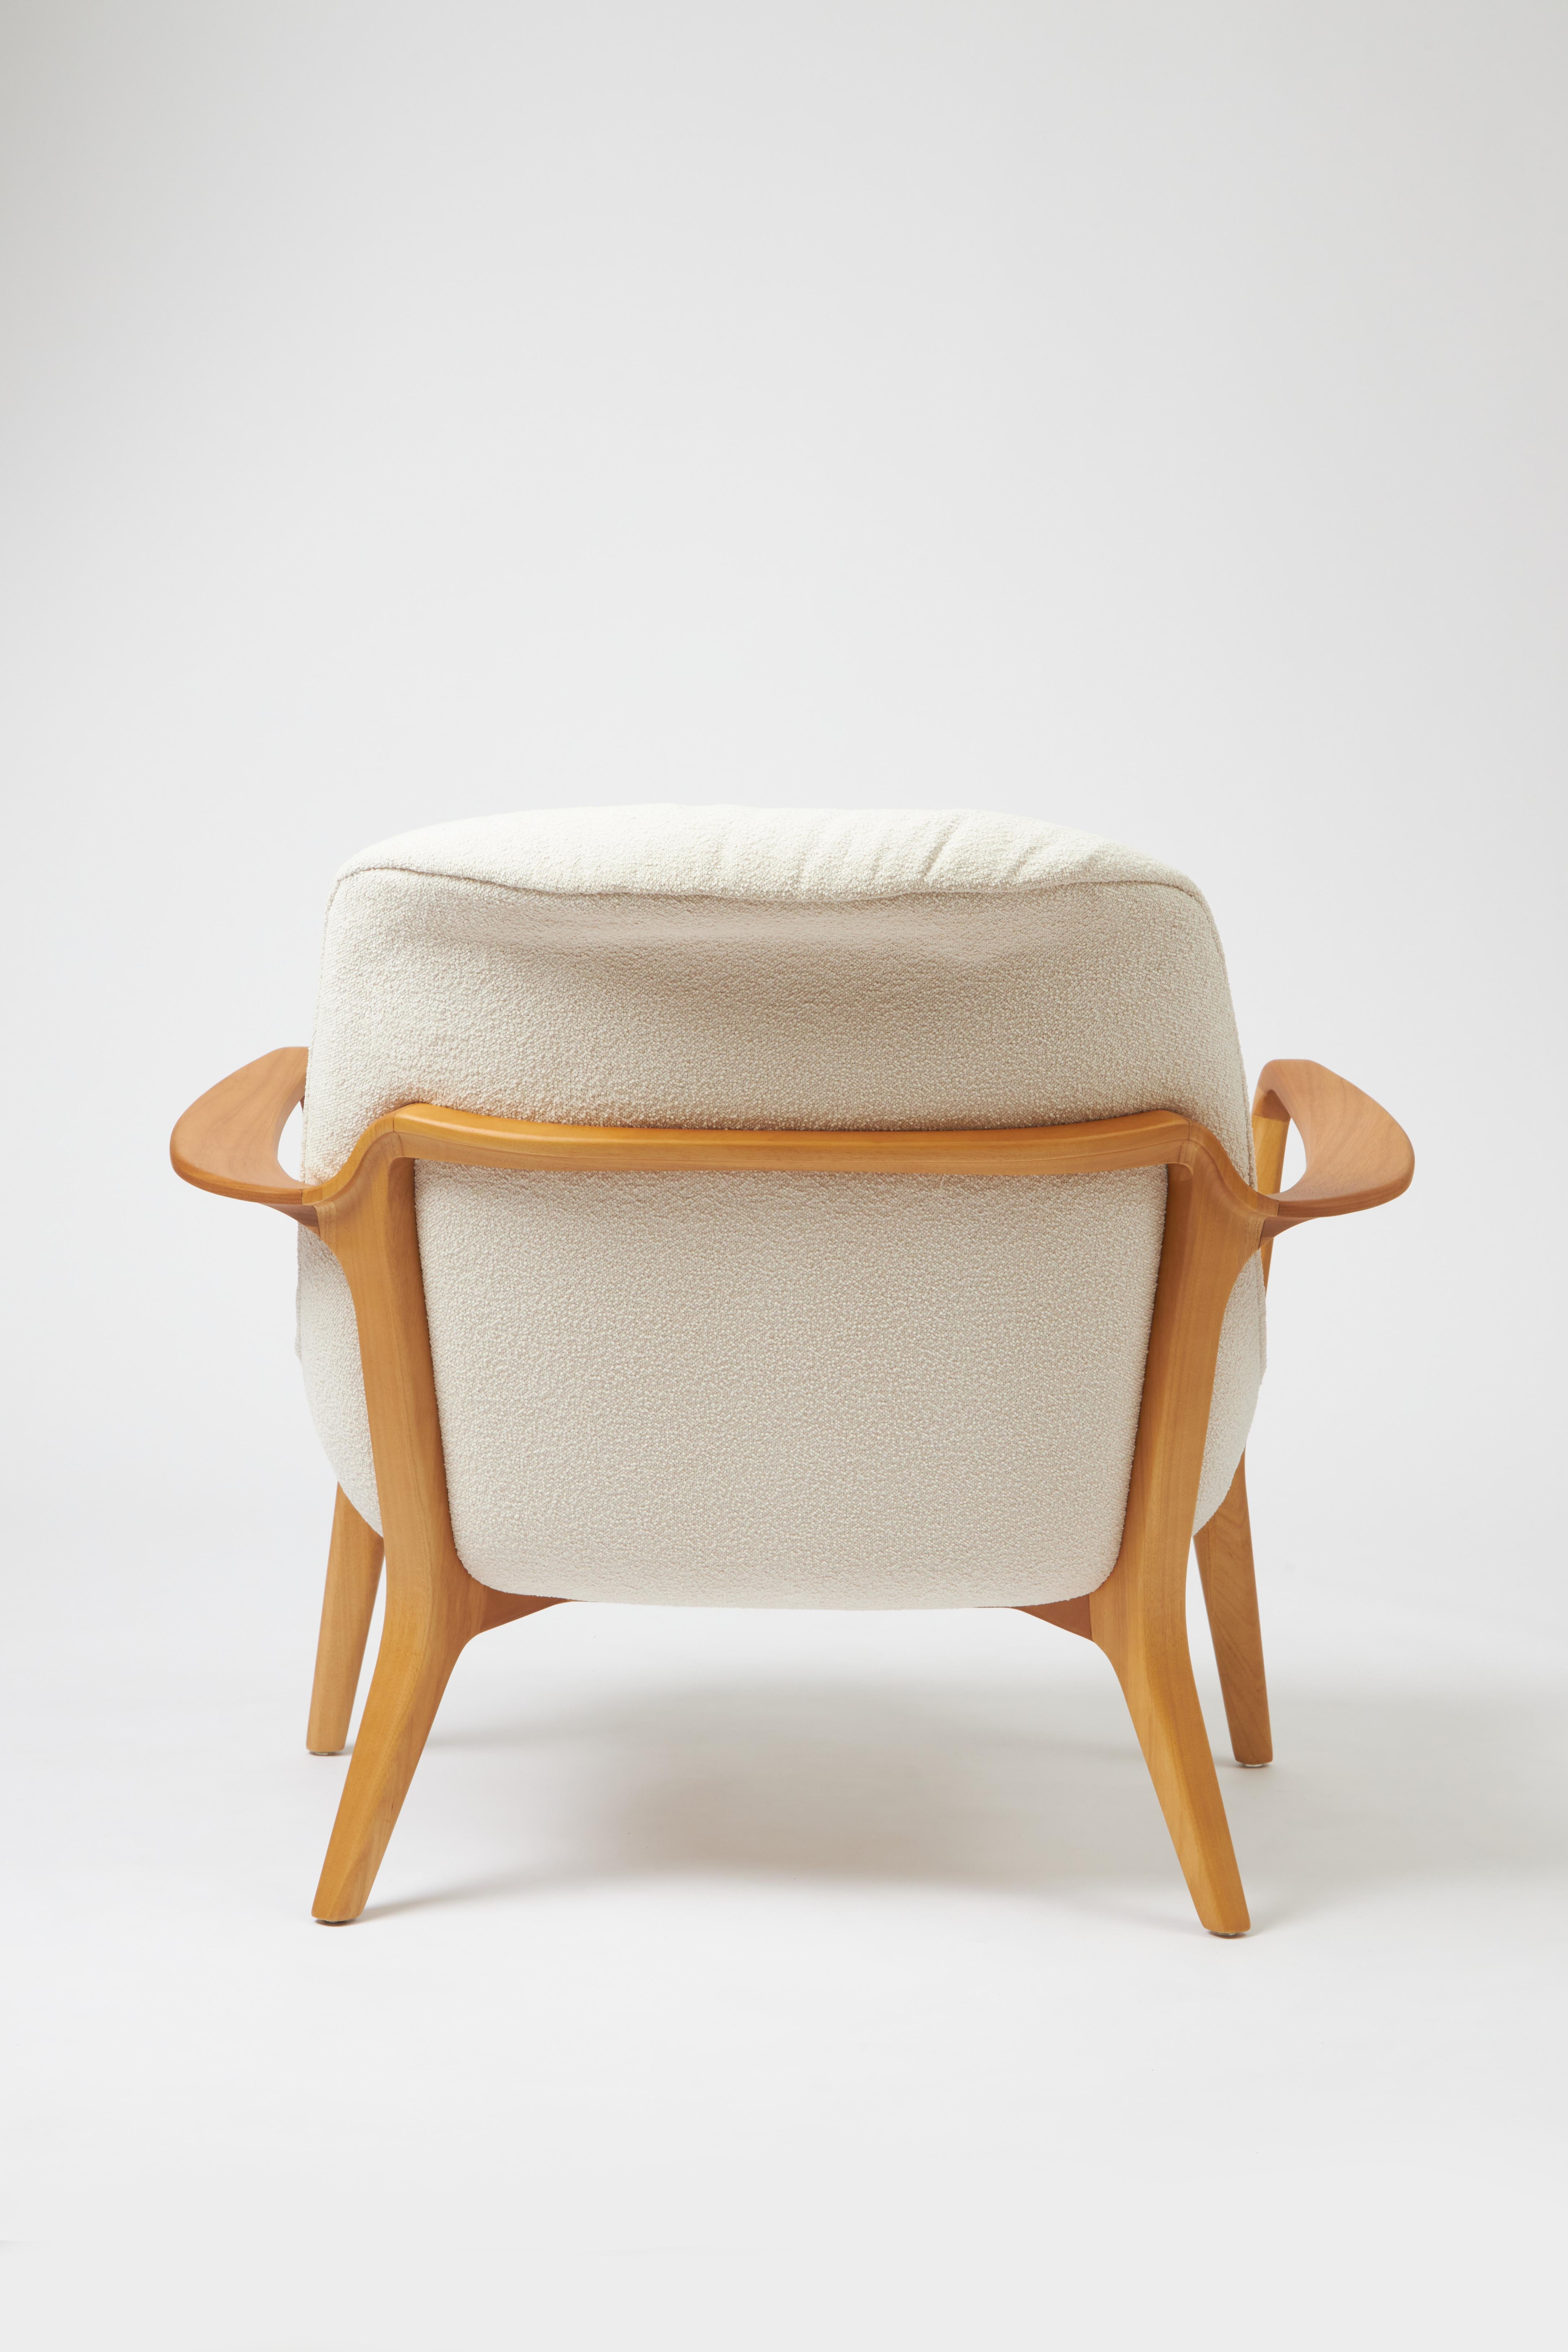 Caning Minimal Style Insigne Armchair Sculpted in solid wood, textiles seating For Sale